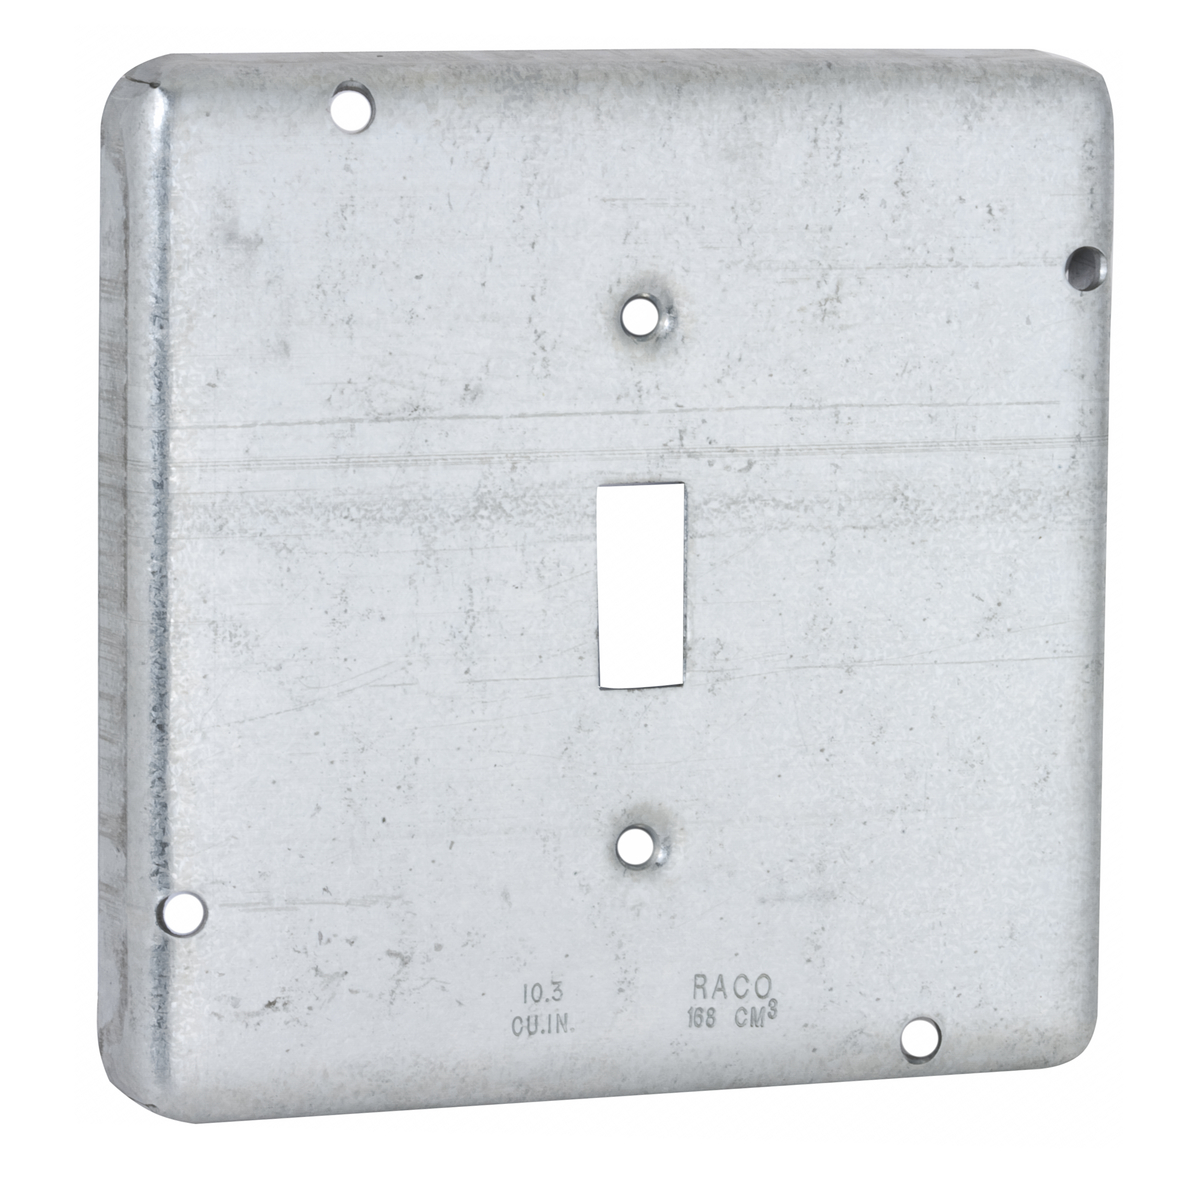 RACO 870RAC 4-11/16" SQUARE EXPOSED WORK COVER, 1 TOGGLE SWITCH